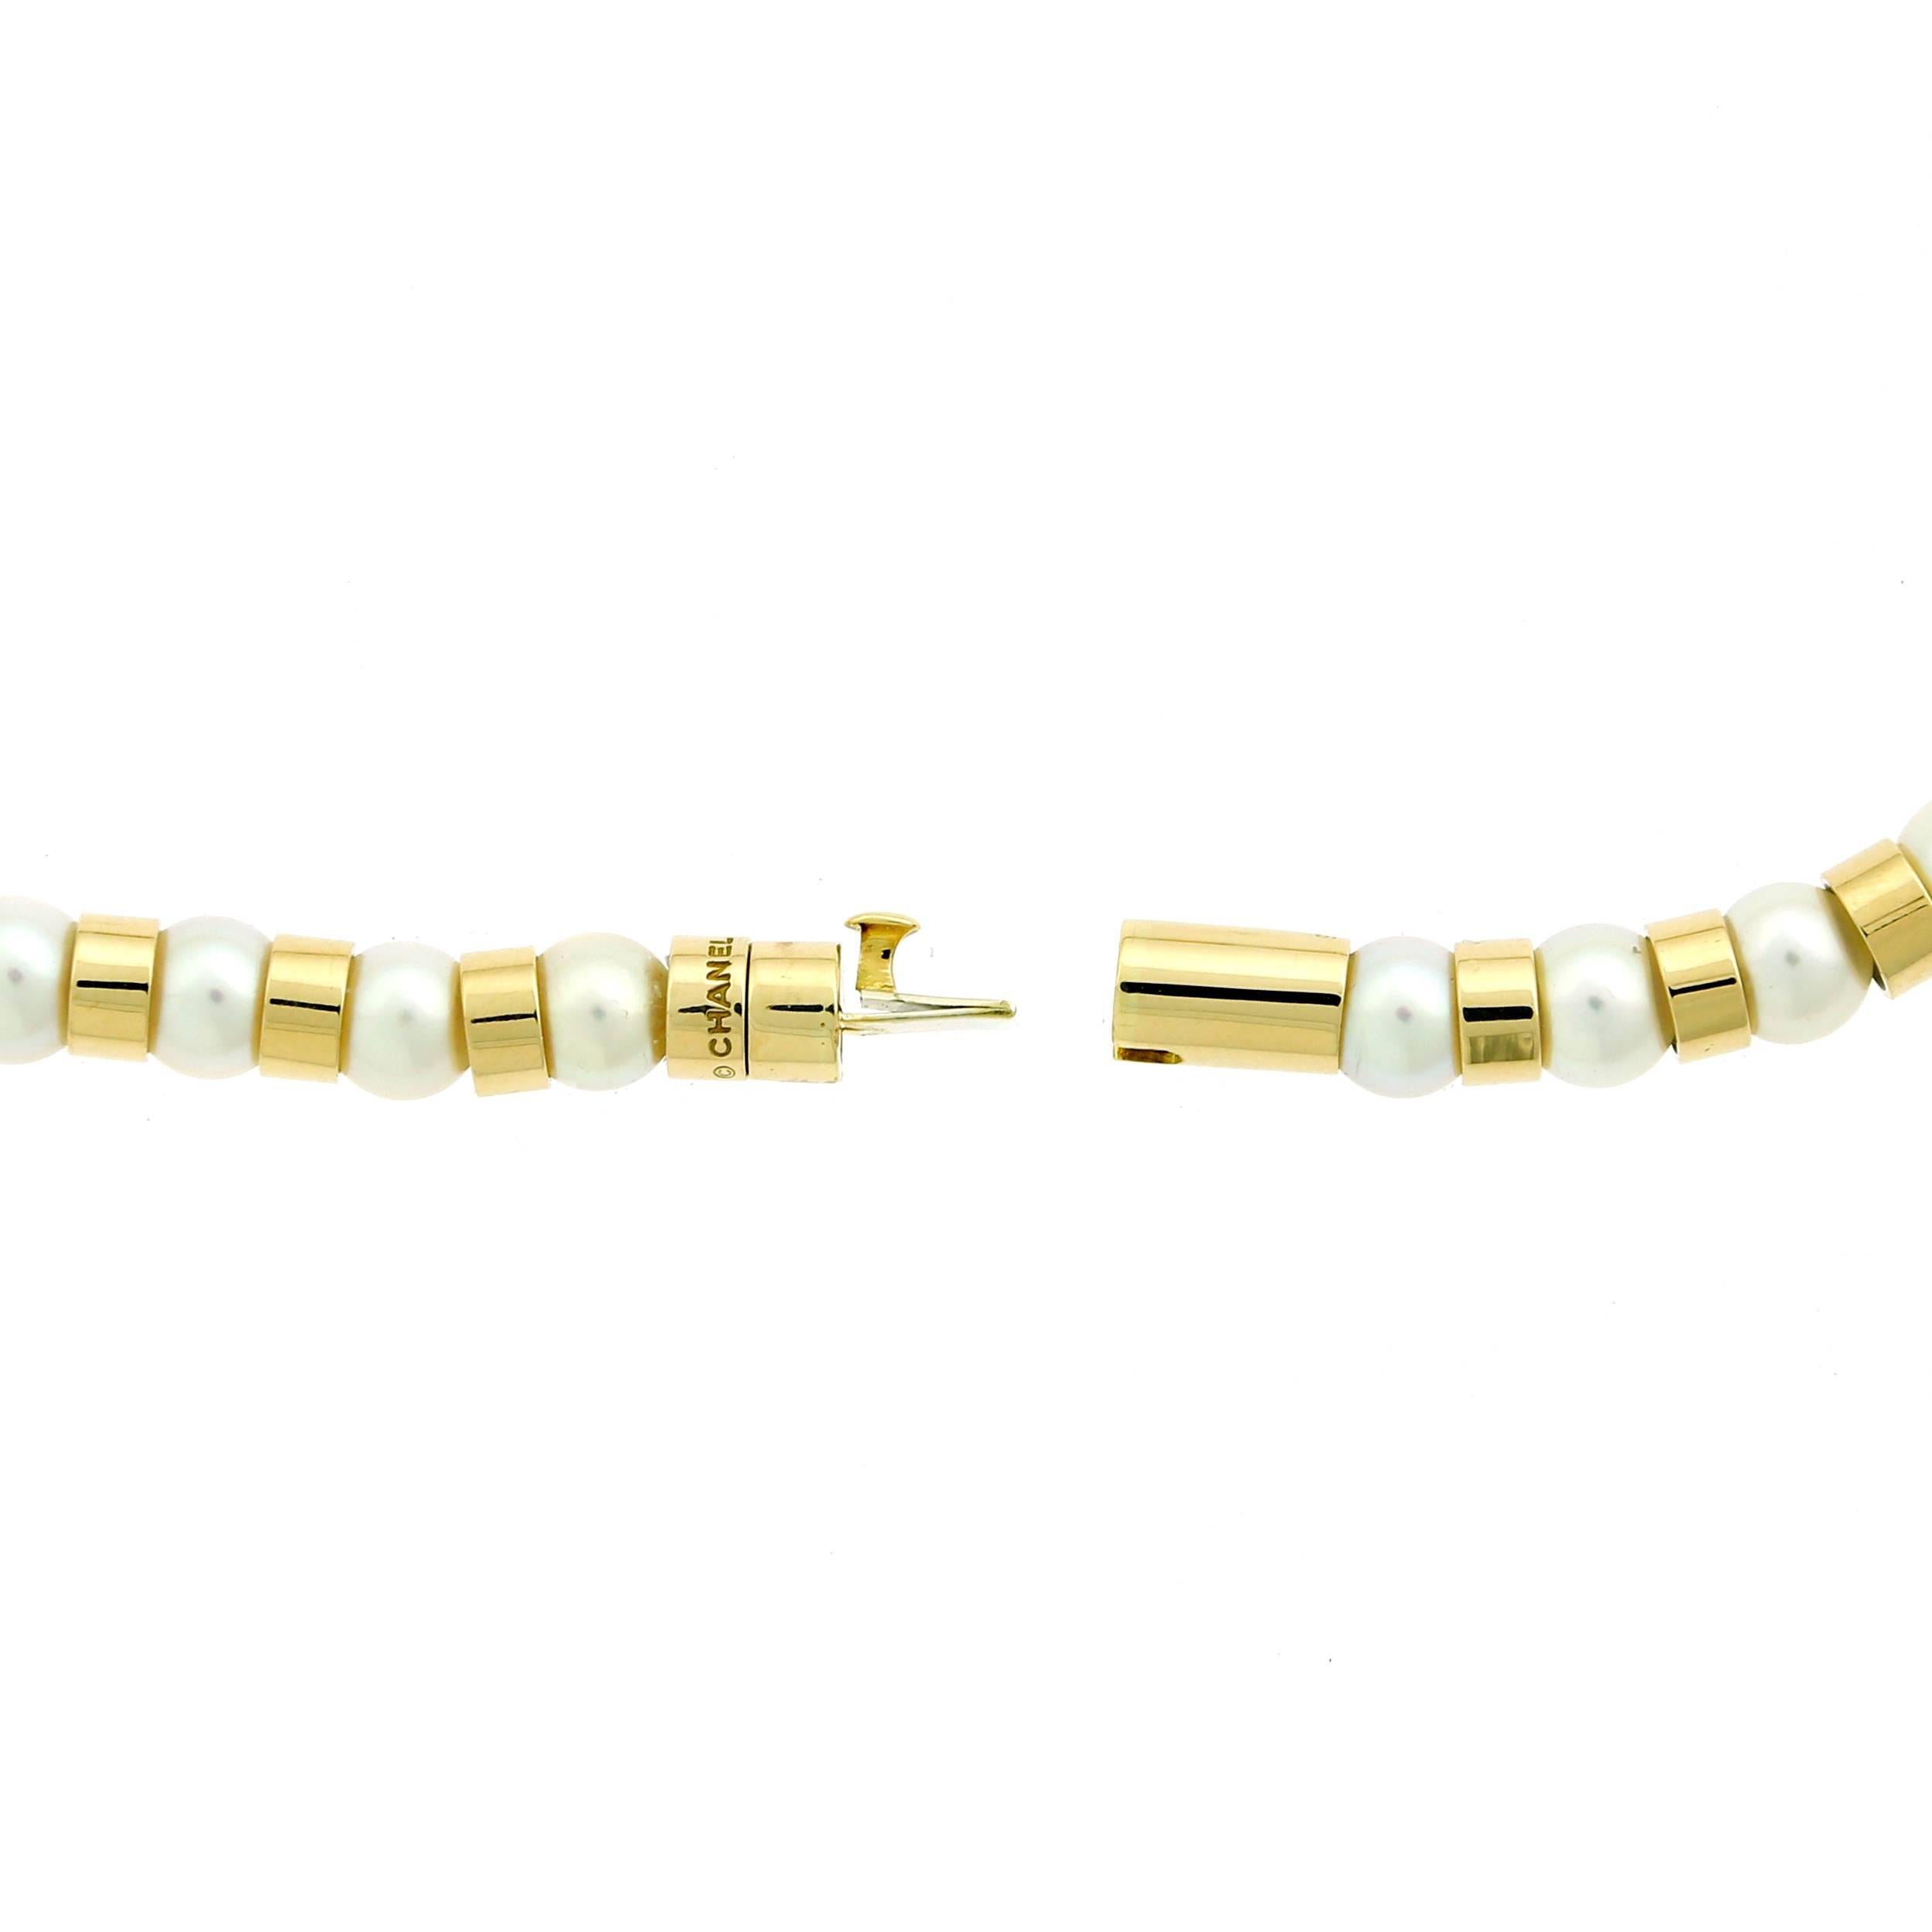 A fabulous Chanel necklace featuring 18k yellow gold beads contrasting with pearls. The necklace has a length of 15